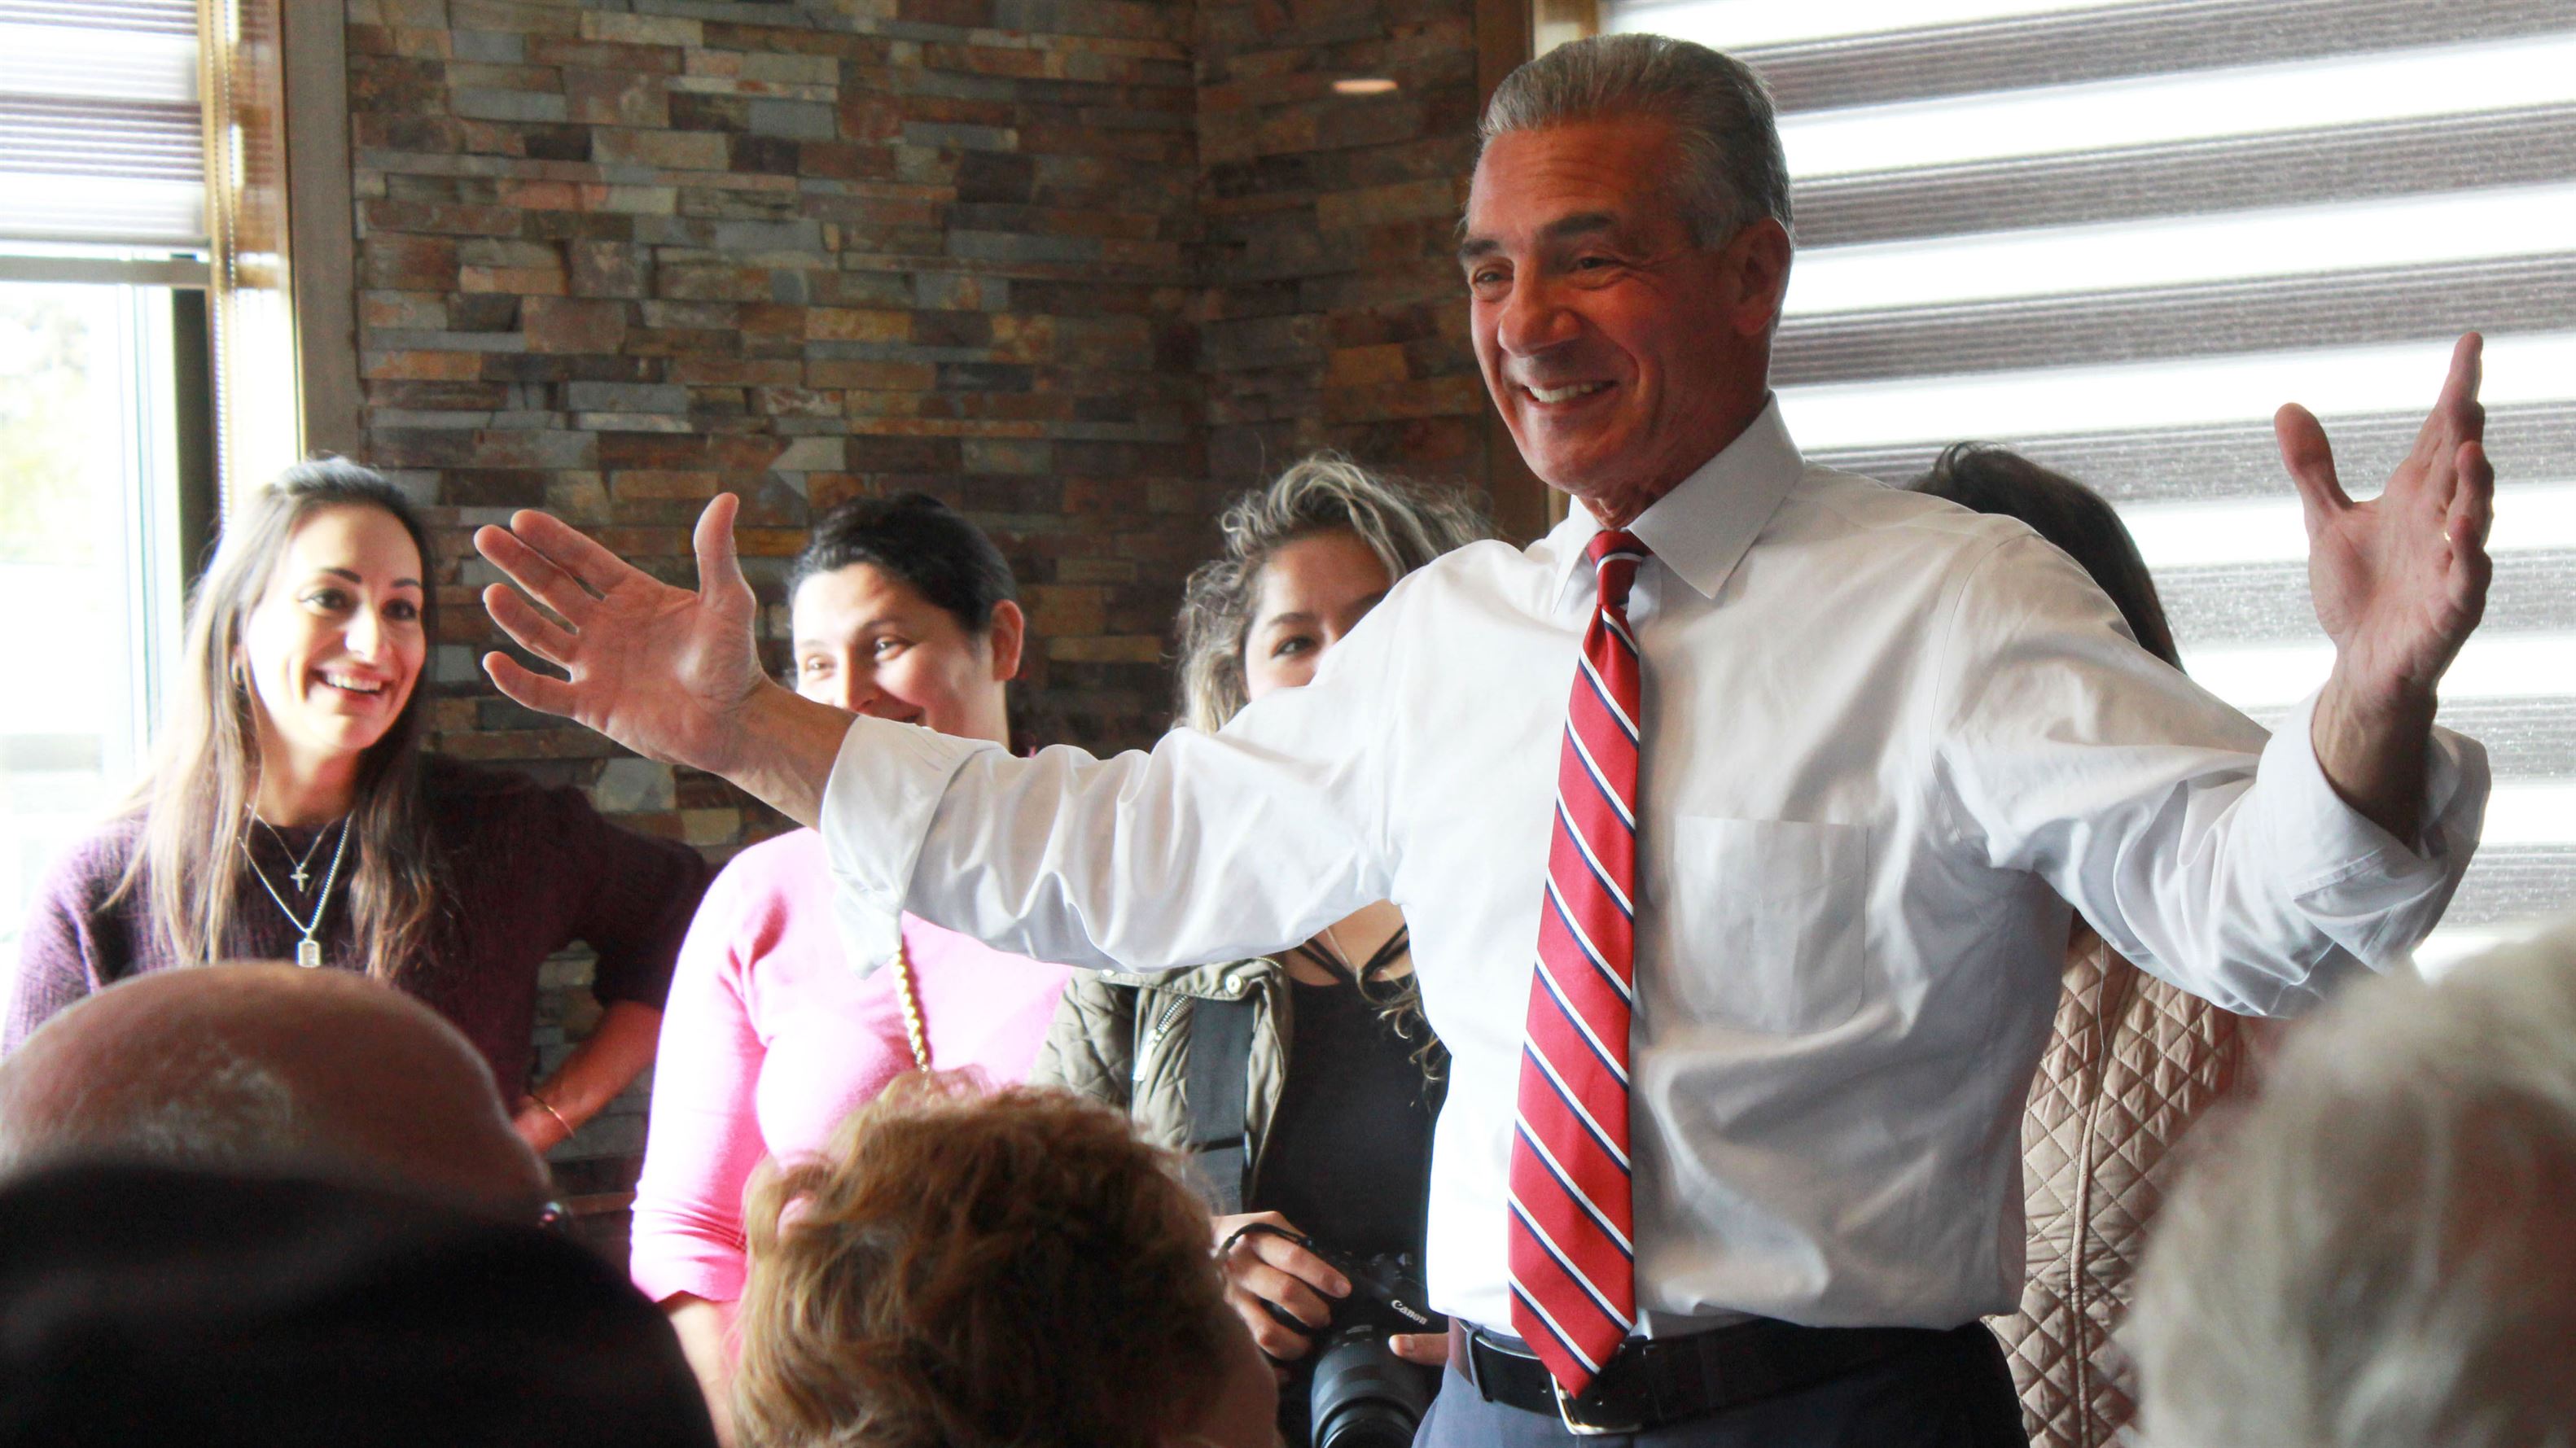 Republican gubernatorial candidate Jack Ciattarelli speaks with a crowd of supporters at a campaign stop last Wednesday at the Suburban Diner in Paramus, New Jersey. Photo courtesy of Amanda Brown